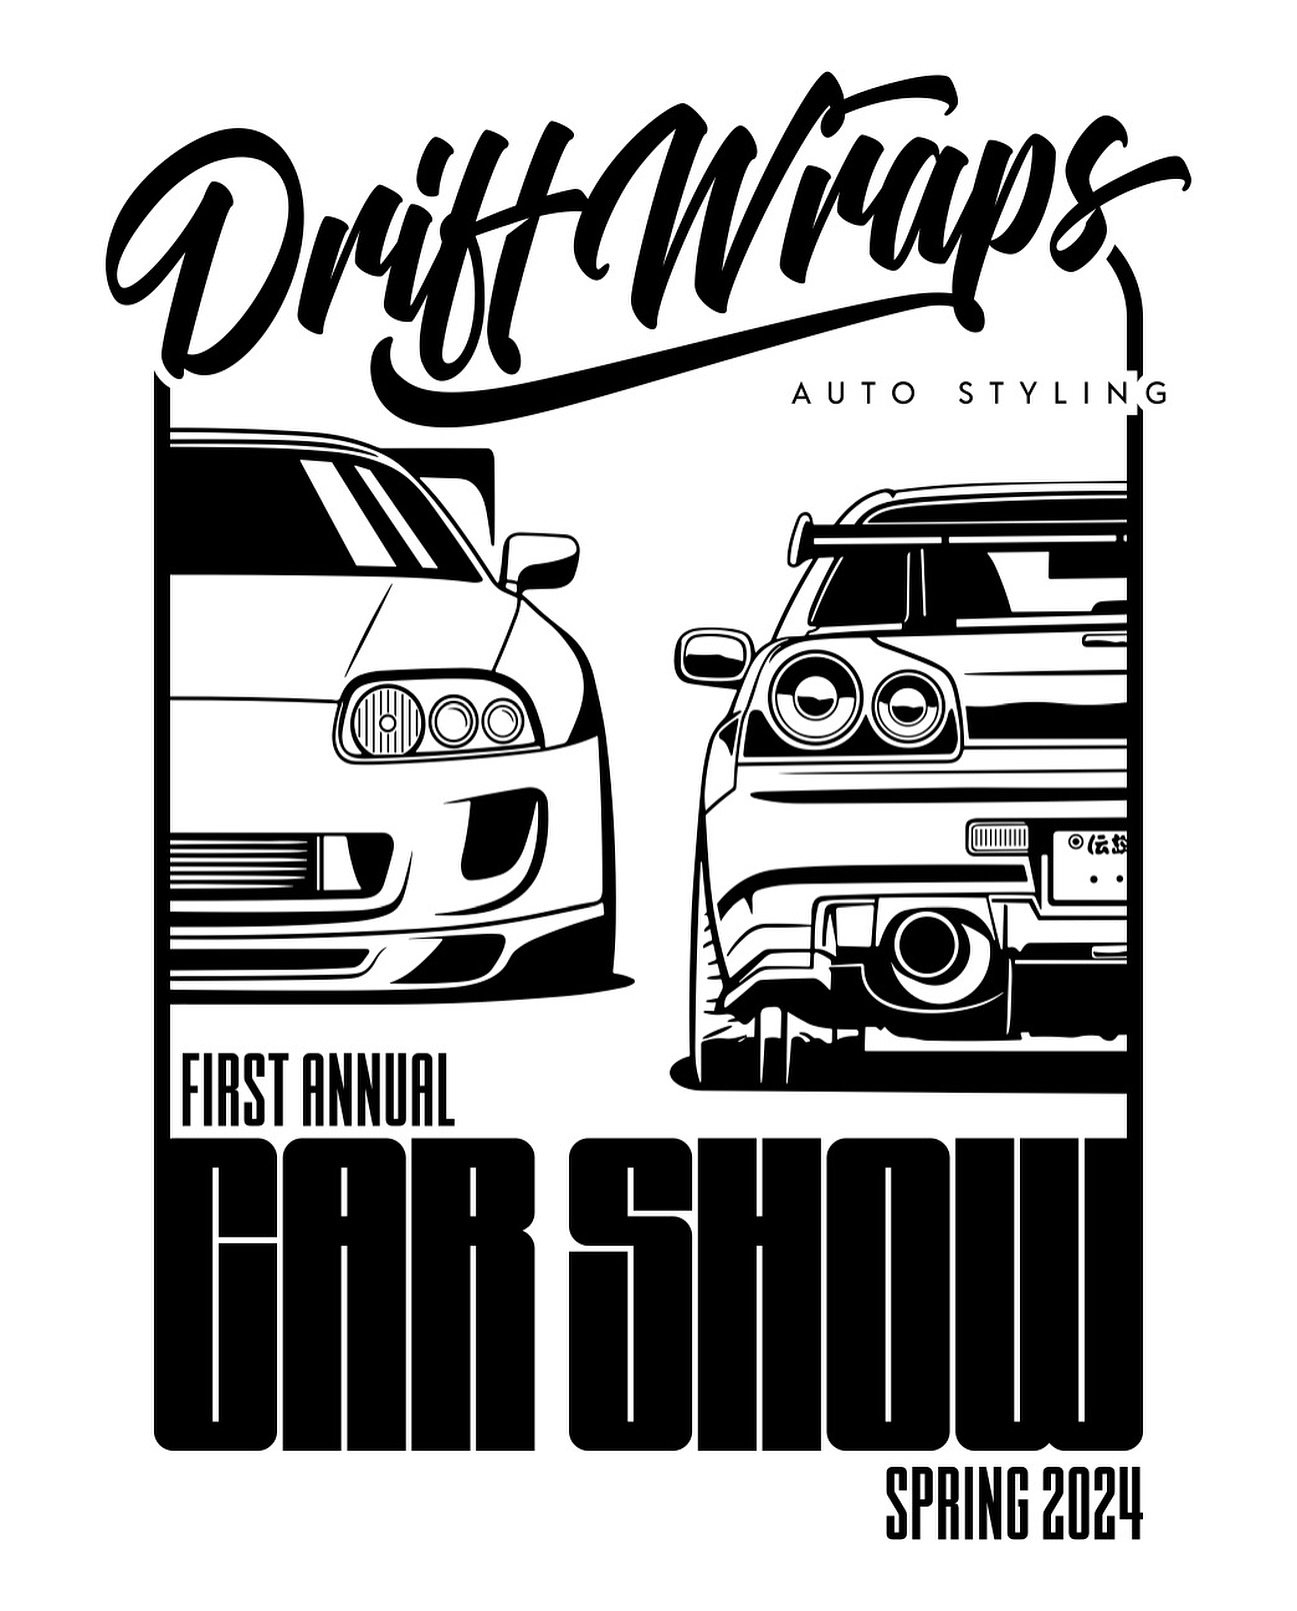 Saturday May 25 from 9am to 2pm at Drift Wraps in Rancho Cordova.

Come by our shop in Rancho Cordova for drinks, music, fun activities and of course, some cars!

We&rsquo;ll be having a one of a kind designed t-shirt, which will be live printed by t